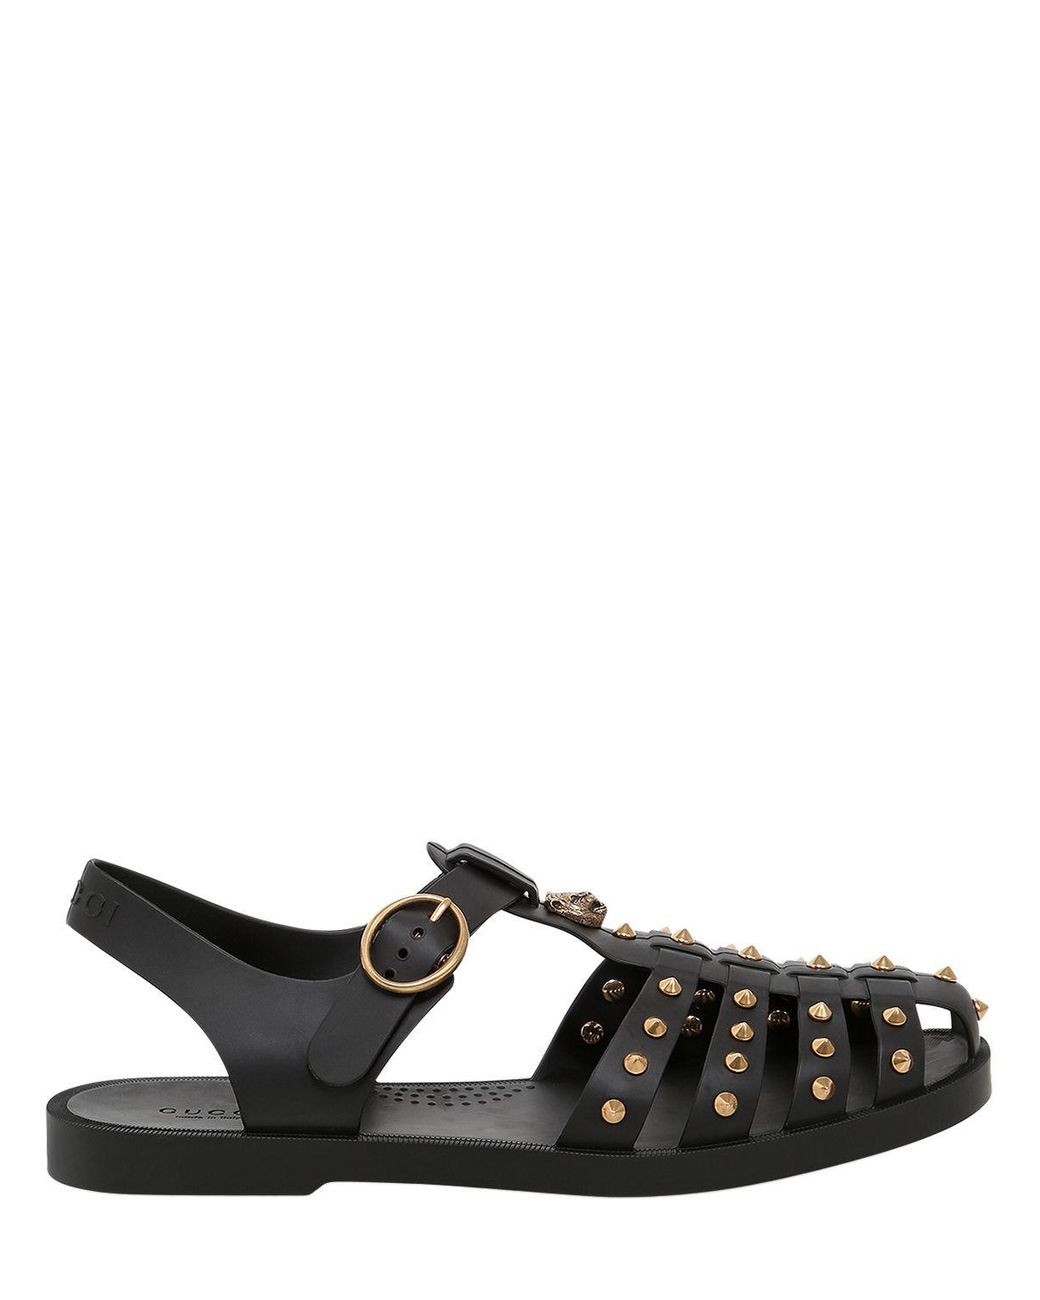 Gucci Studded Gladiator Rubber Sandals in Black | Lyst